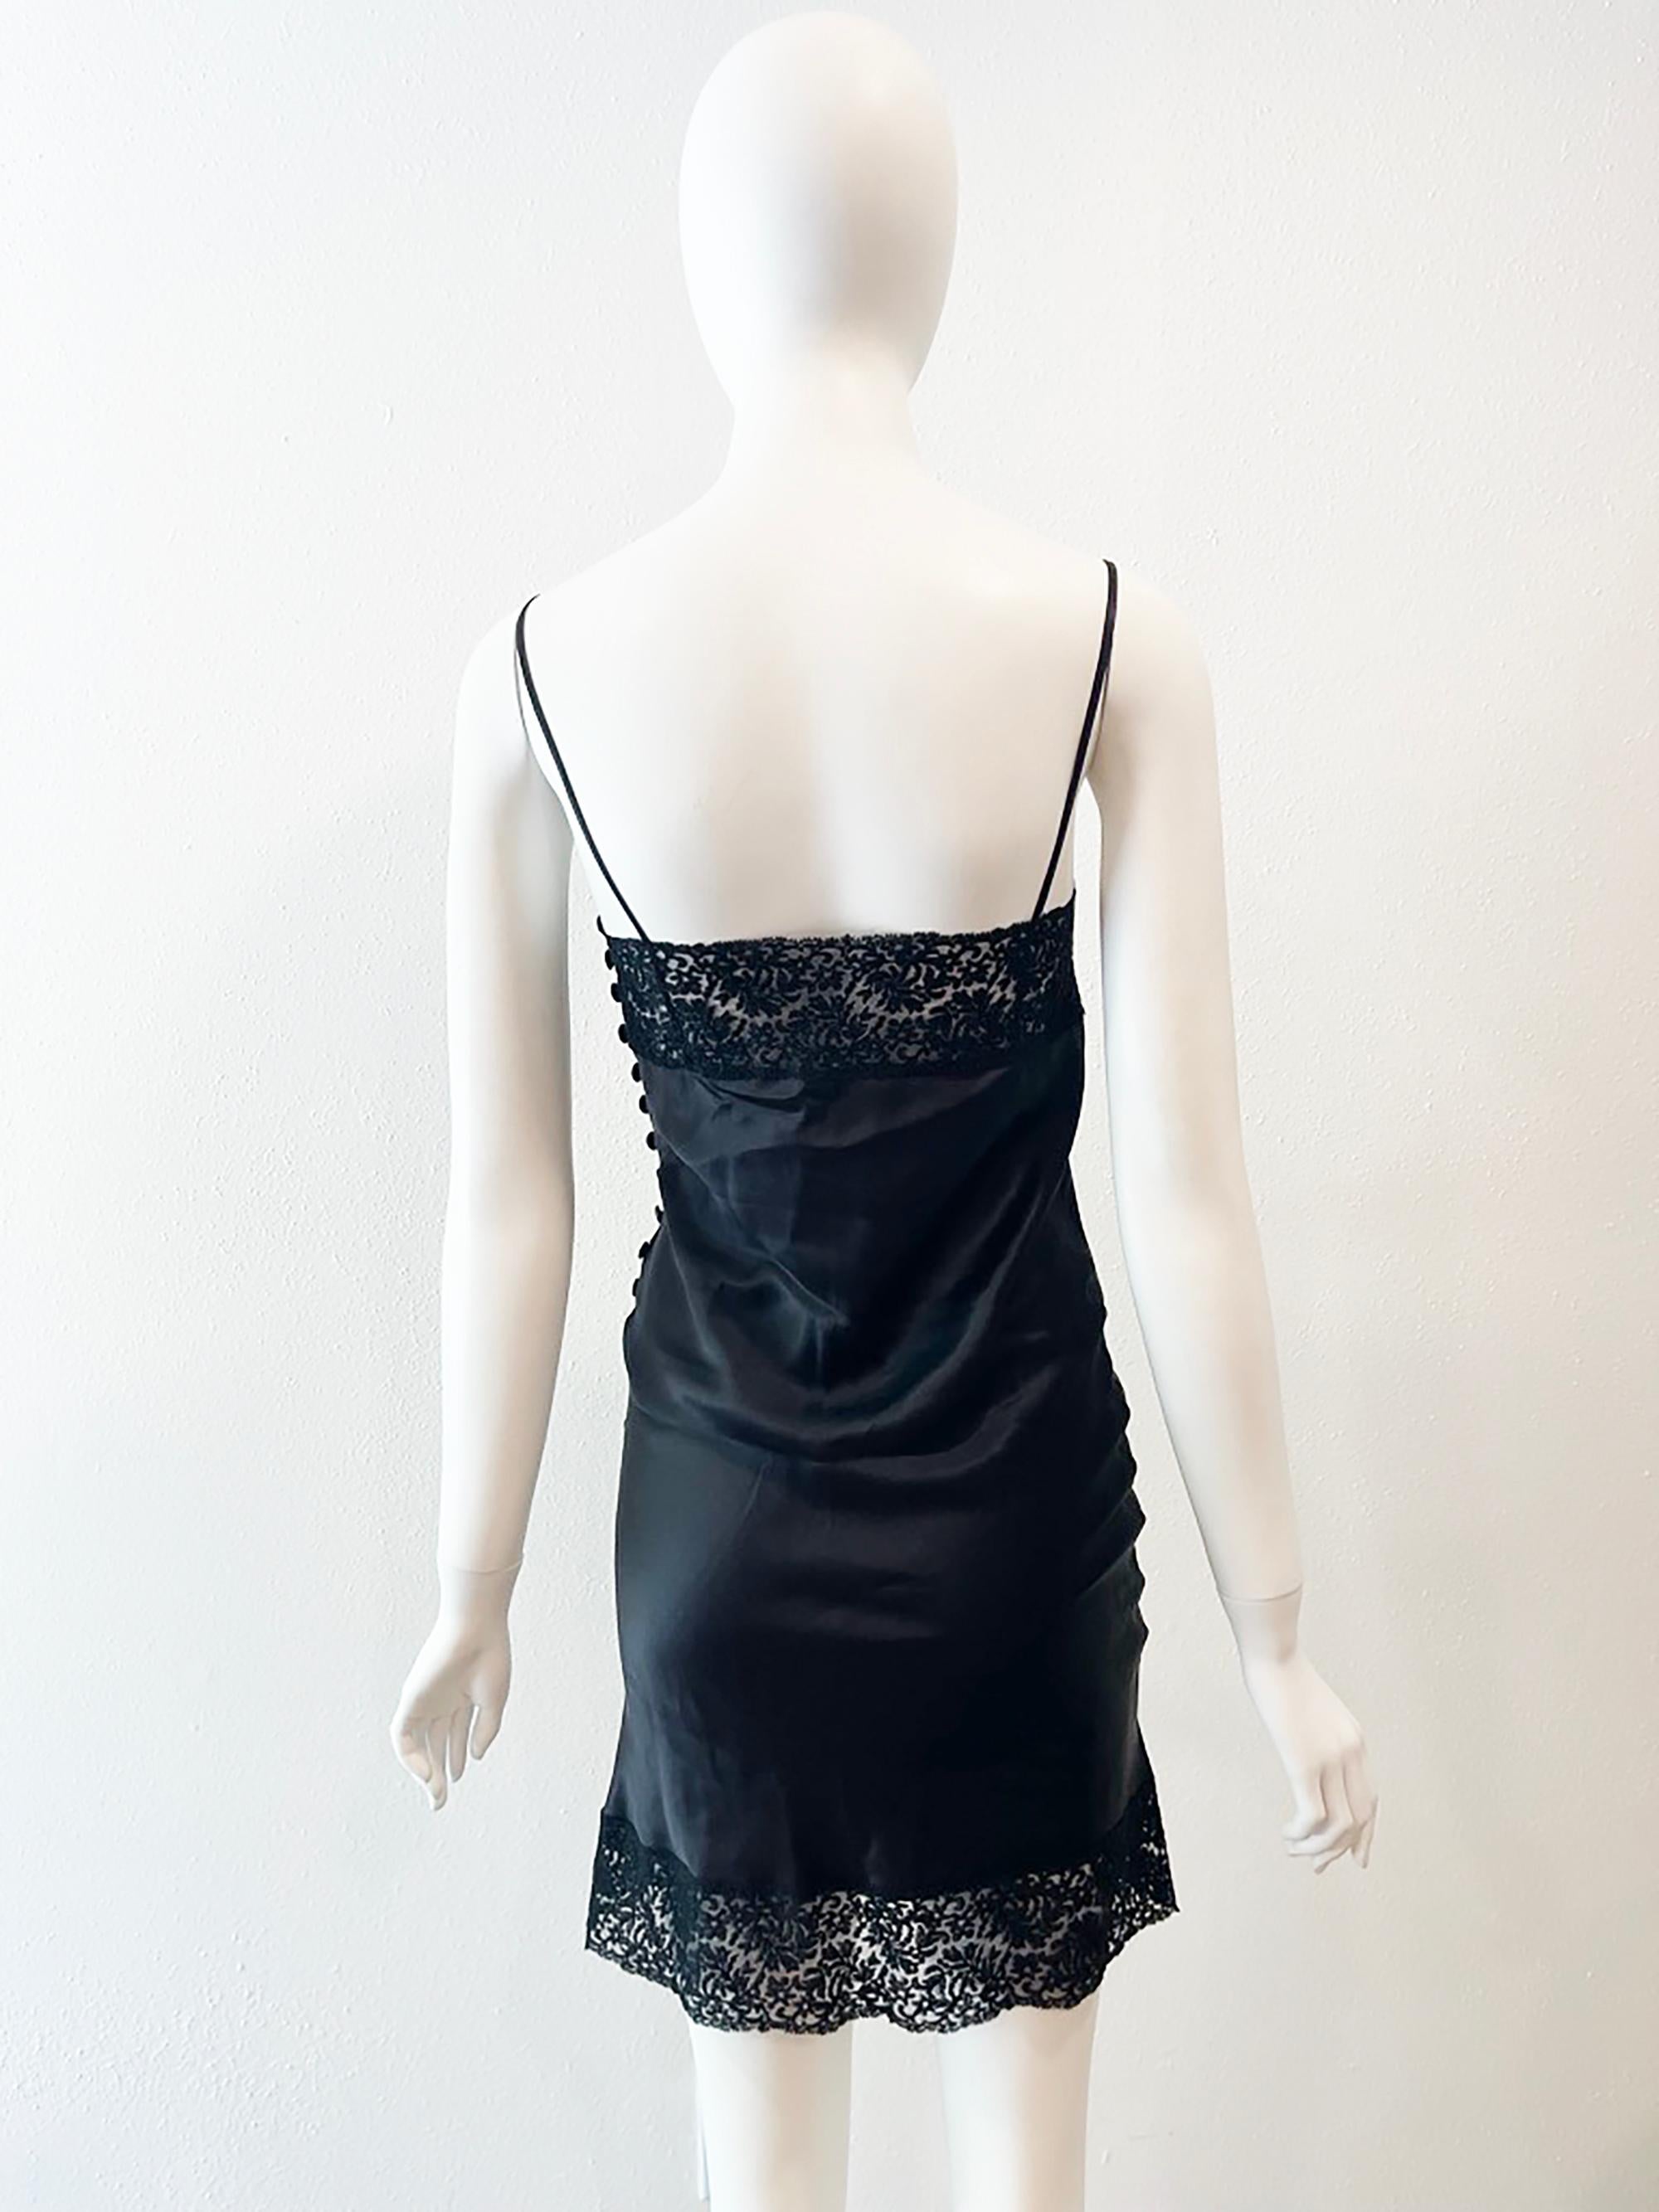 Vintage F/W 1997 Christian Dior by John Galliano Black Lace Satin Mini Dress
DESIGNER: F/W 1997 Christian Dior by John Galliano- CONDITION: Good- Flawless!- FABRIC: 100% silk- COUNTRY MADE: France- SIZE: 40

MEASUREMENTS; provided as a courtesy